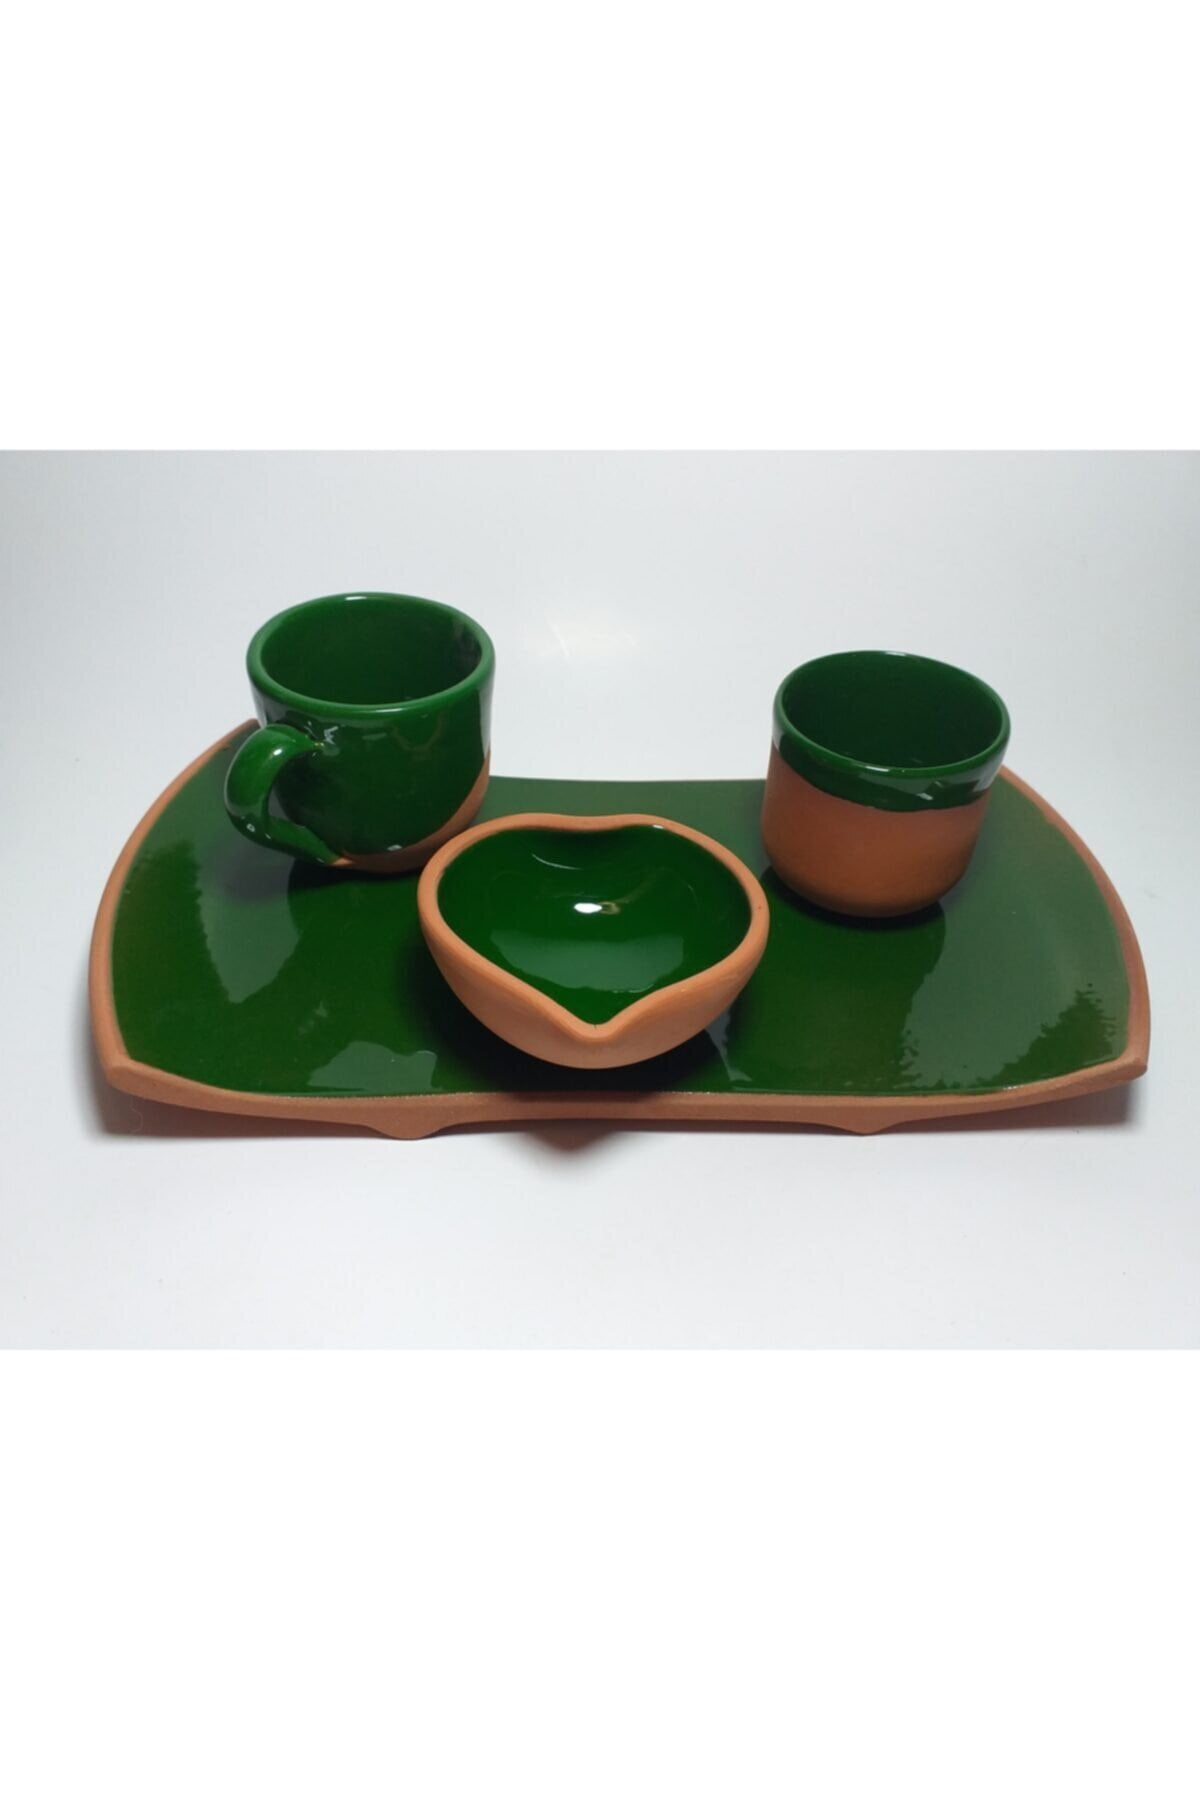 Avanos Green Coffee Cup Set with Service Serving green, red, petrol green variant
